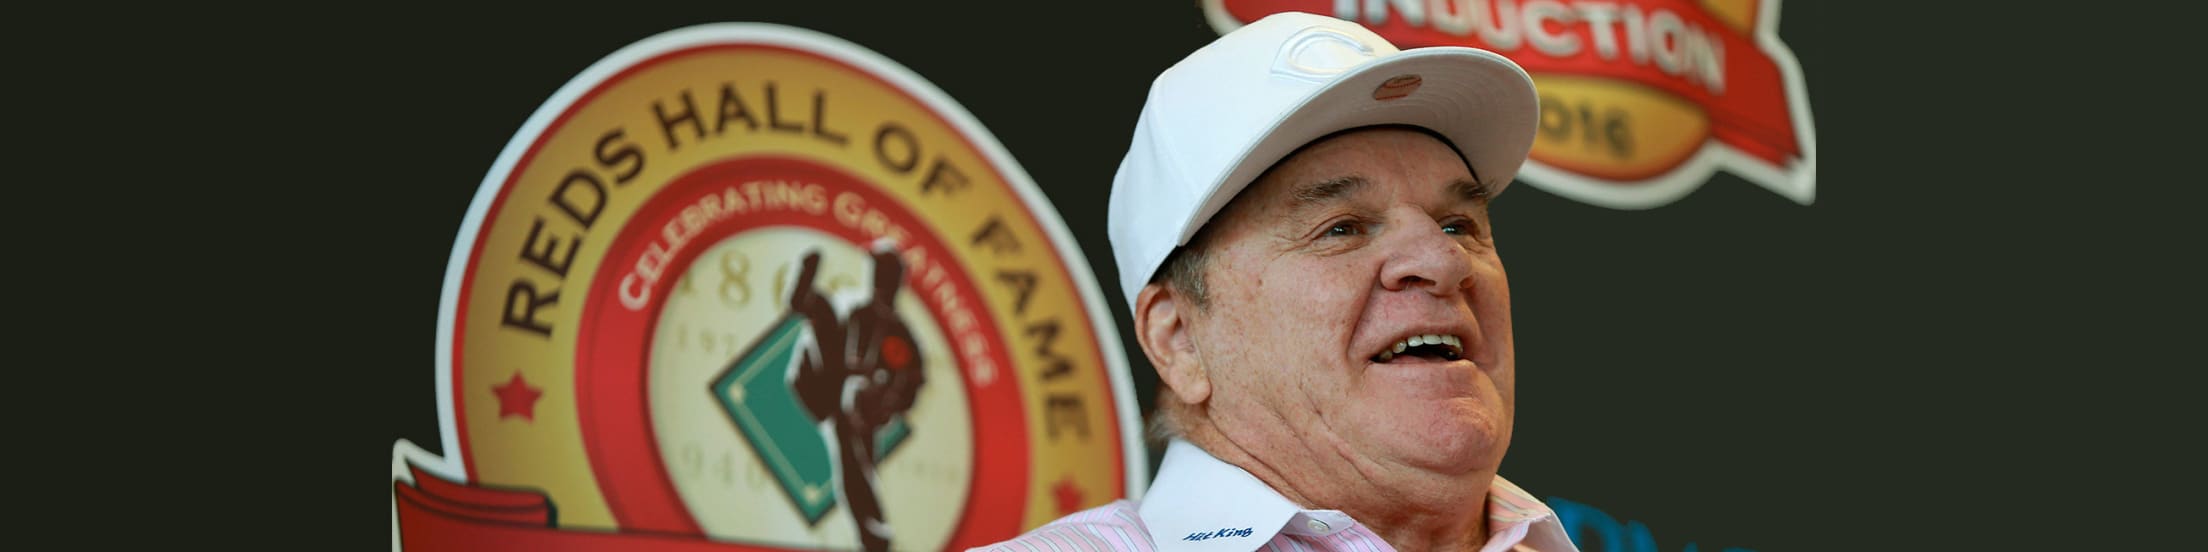 Reds retire Hit King Pete Rose's No. 14